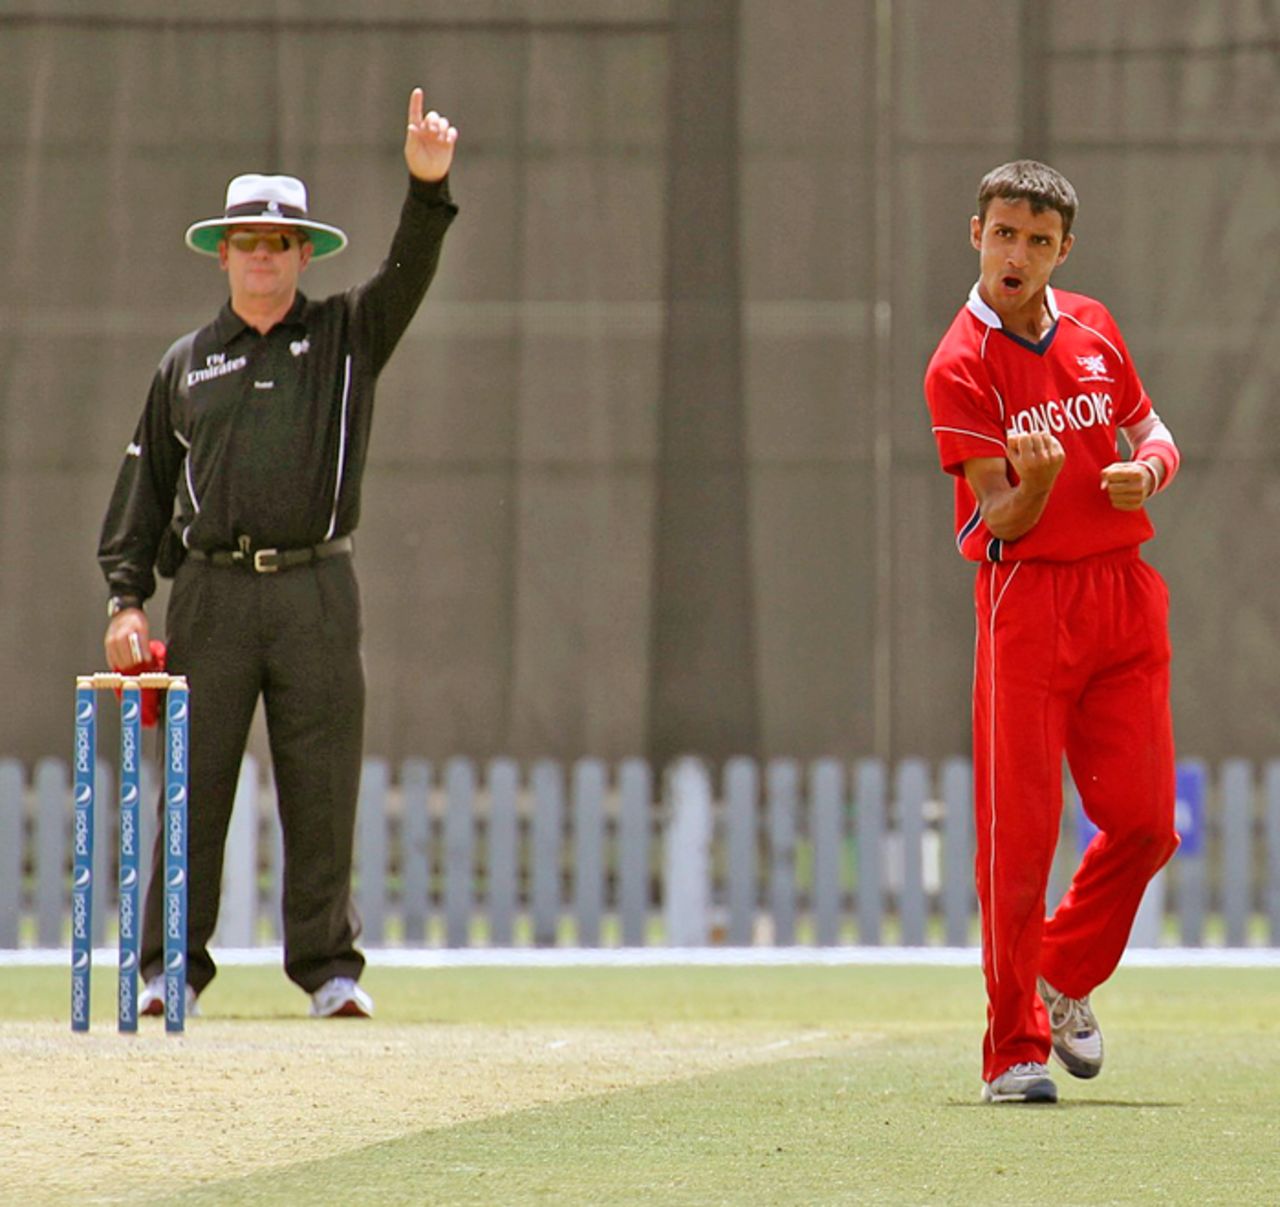 Asif Khan grabs a wicket for Hong Kong against Bermuda at the ICC World Cricket League Division 2 in Dubai on 9th April 2011